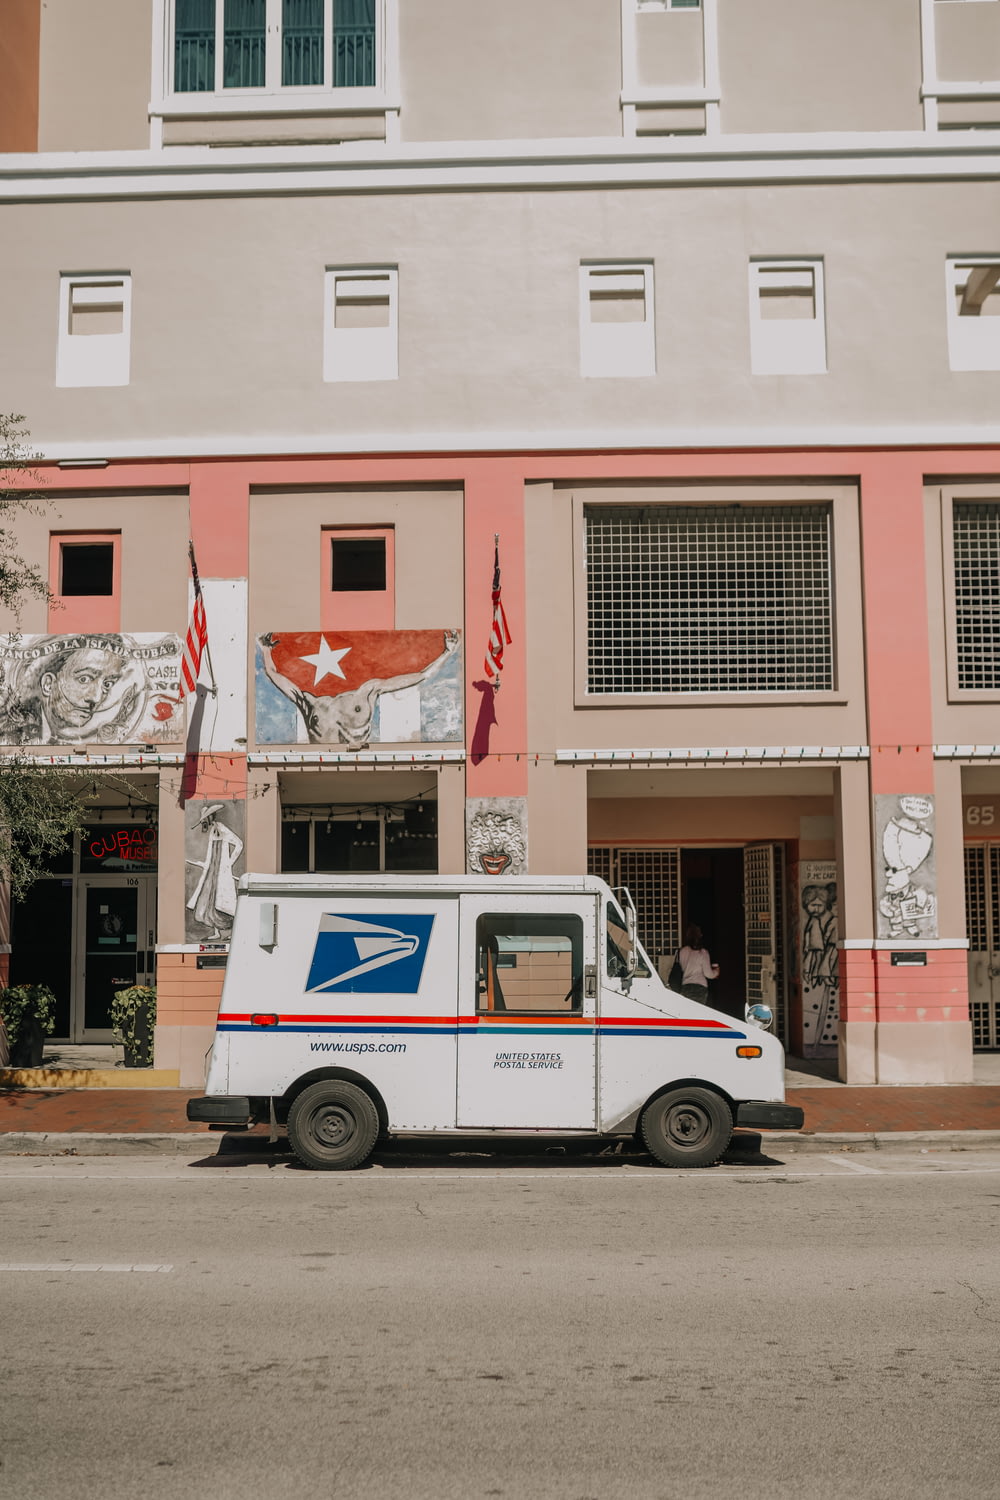 a mail truck parked in front of a building